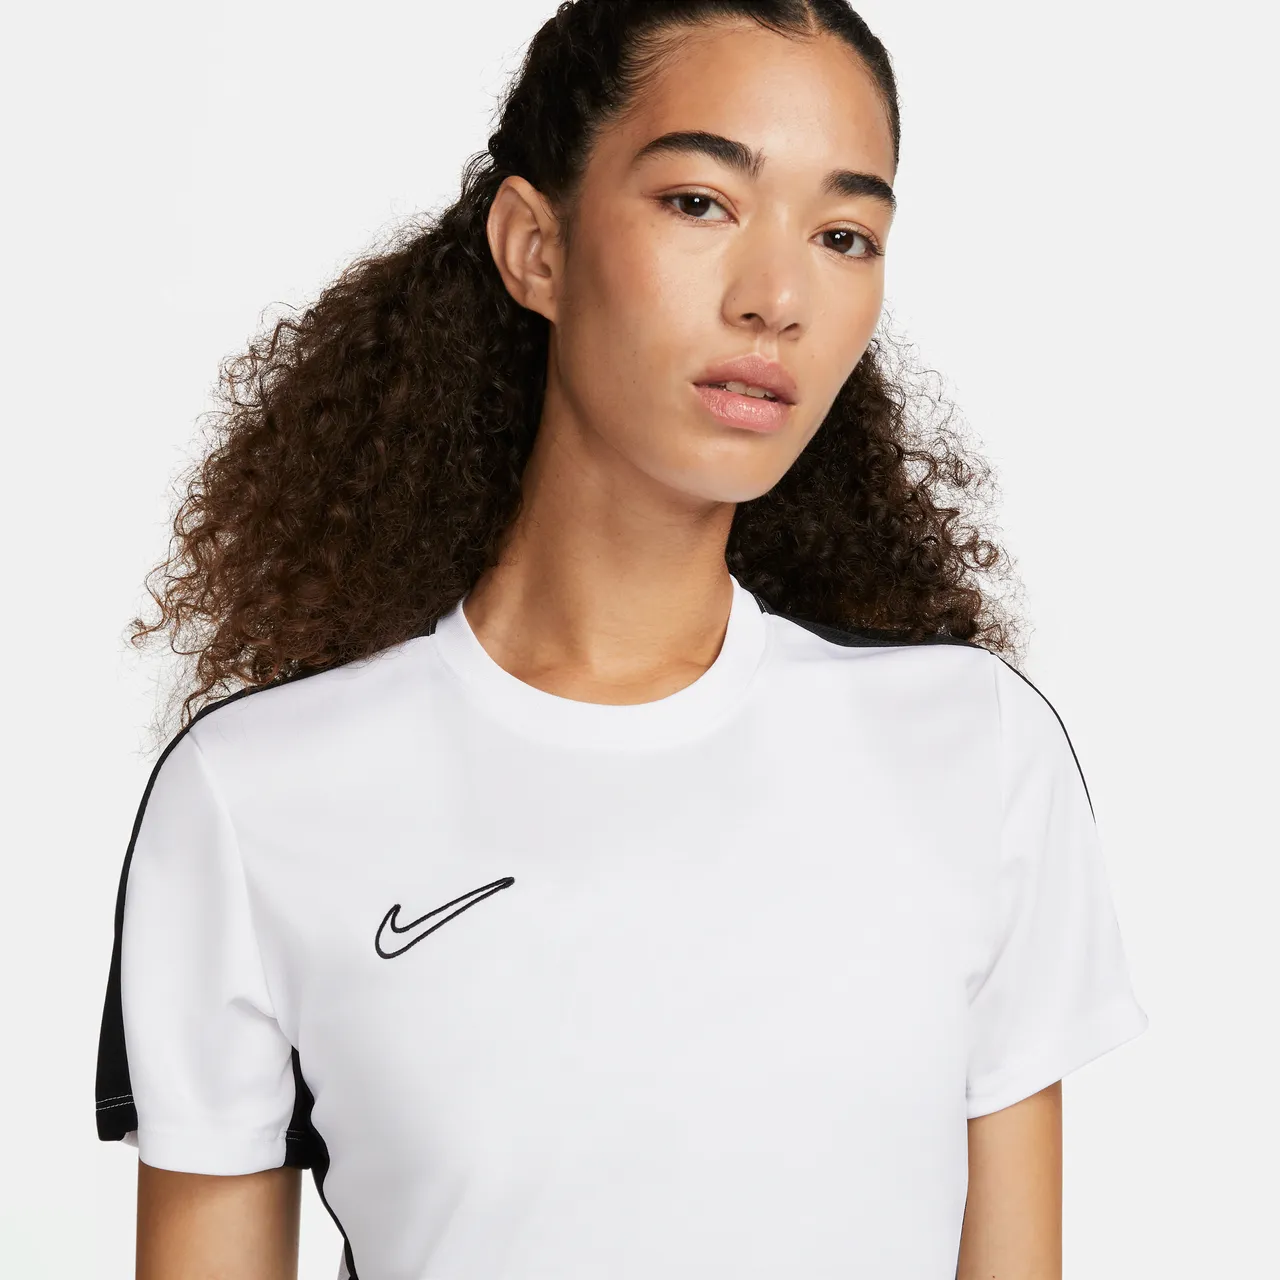 Nike Dri-FIT Academy Women's Short-Sleeve Football Top - White - Polyester